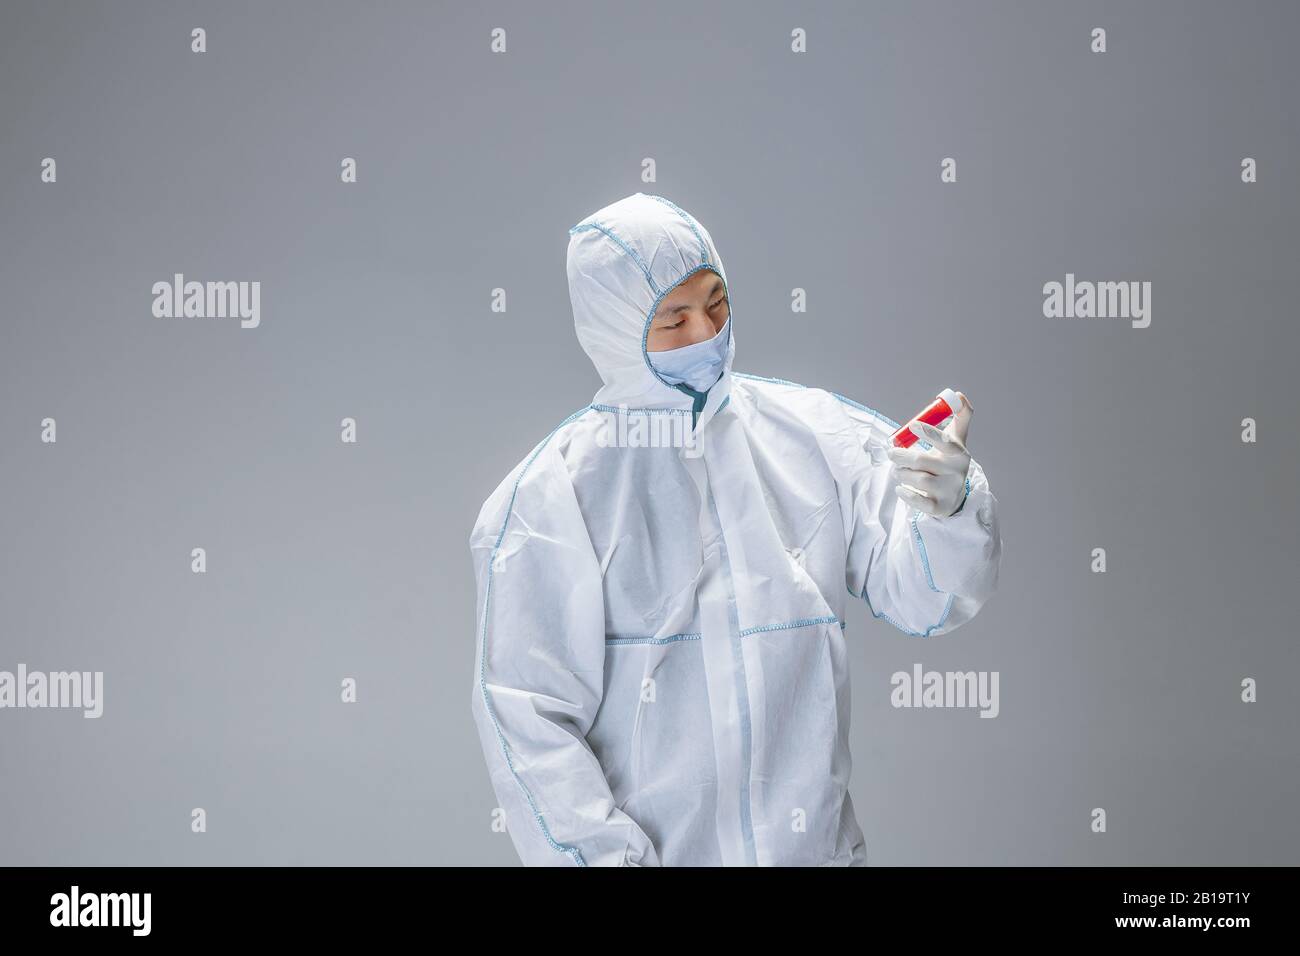 Dangerous. Medic in white hazmat protective suit checking and scanning ...